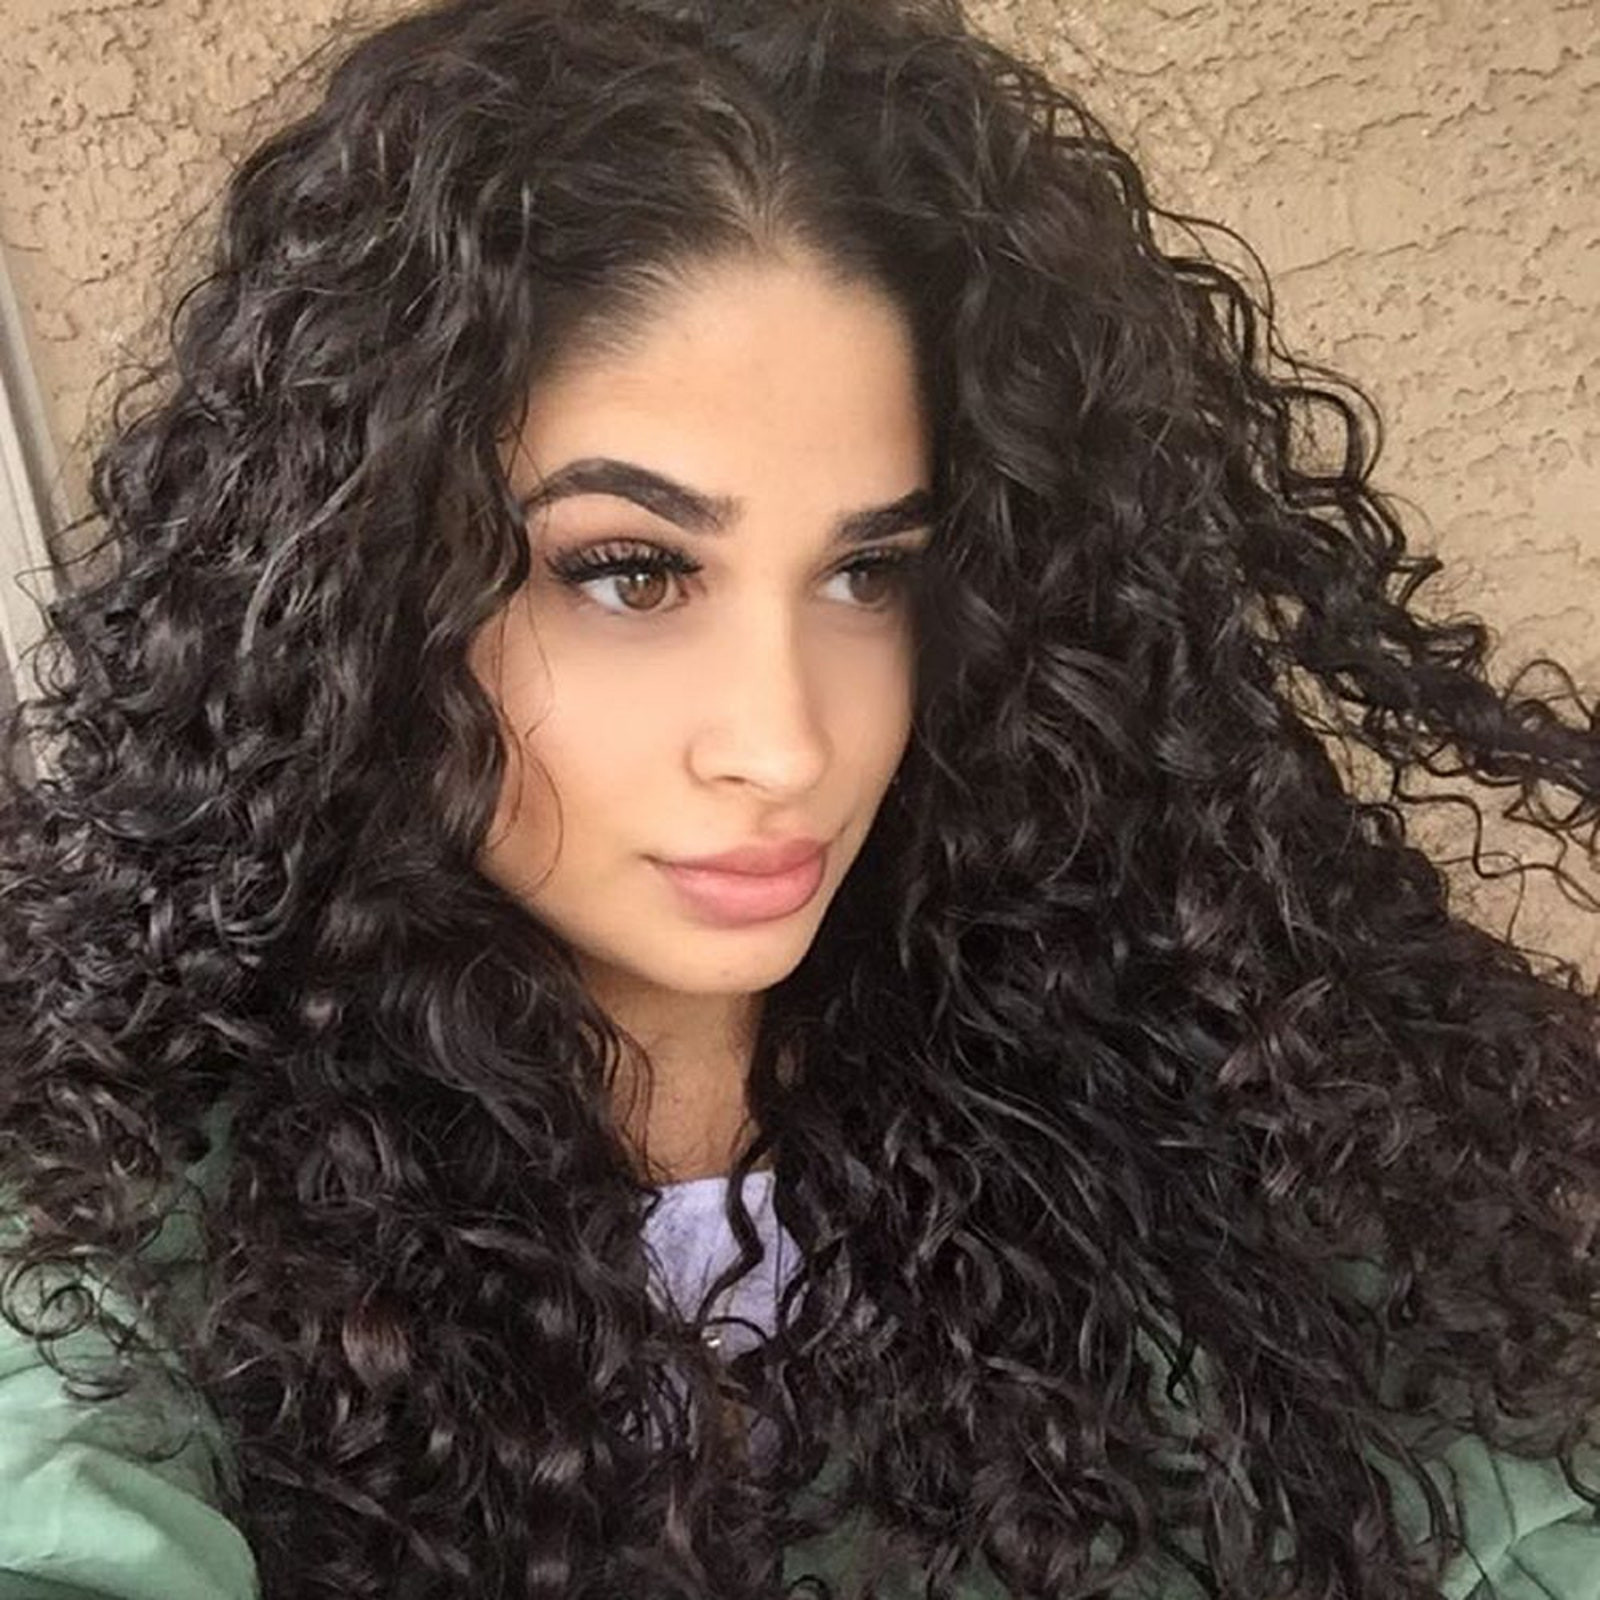 Cute Girl Hairstyles Instagram
 Curly Girls to Follow on Instagram Best Curly Hair